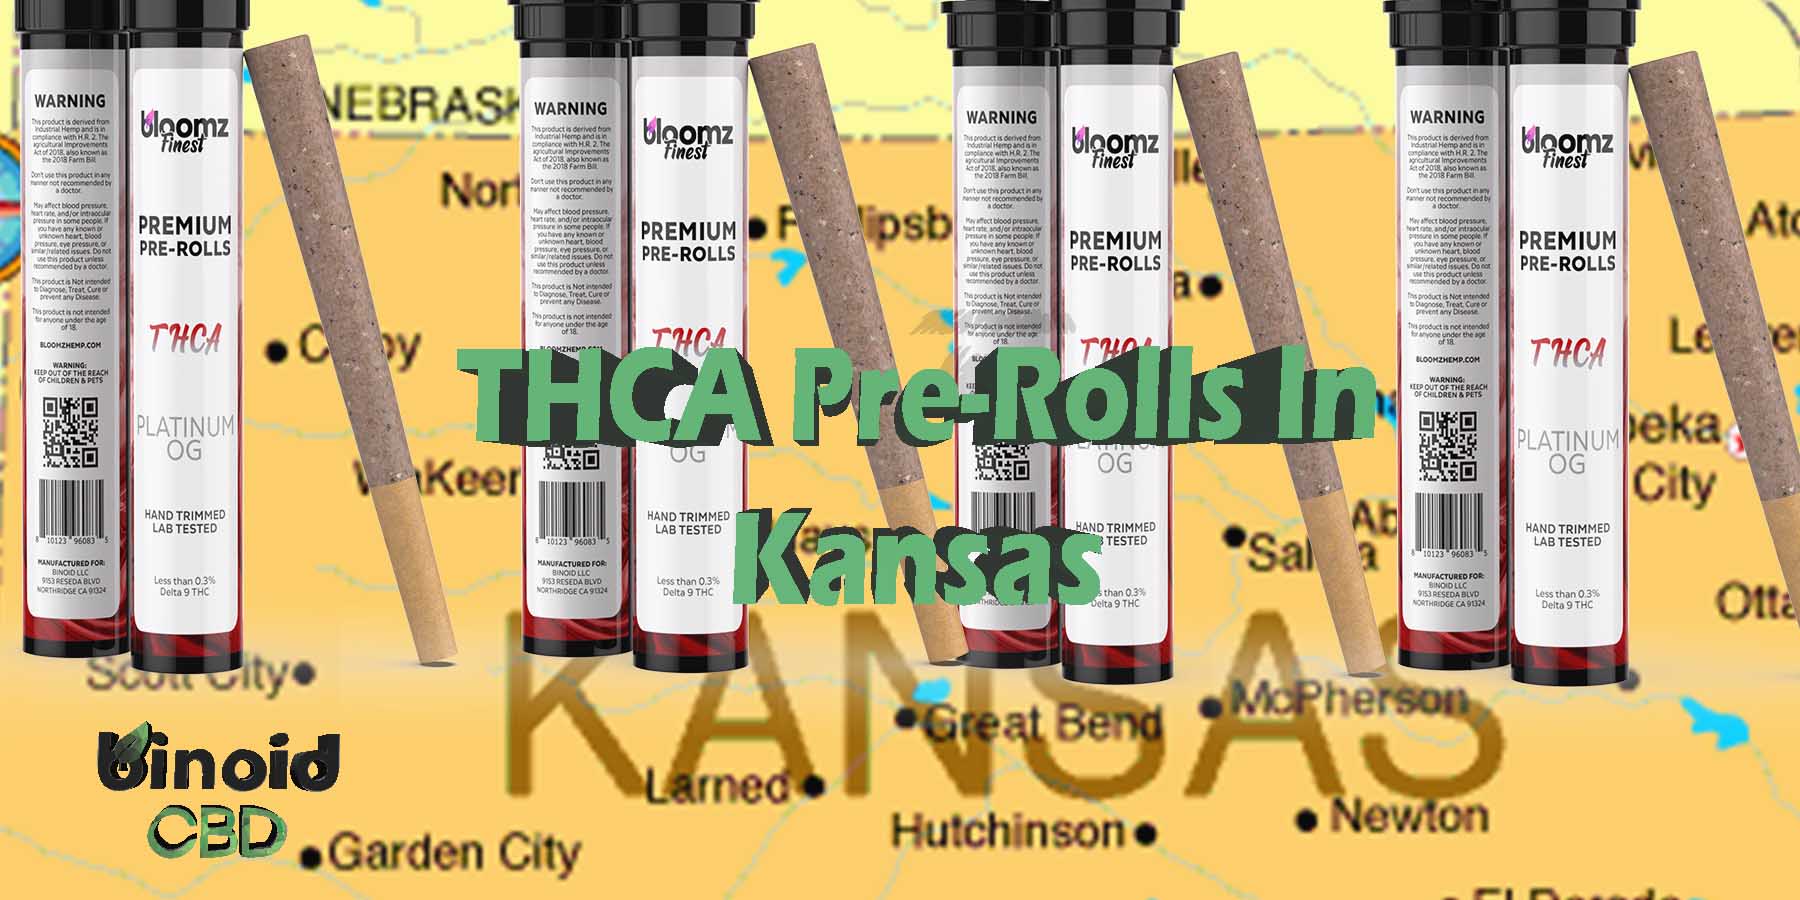 THCA Pre-Rolls In Kansas Hemp Flower Where To Get Near Me-Best-Place-Lowest Price Coupon Discount Strongest Brand Bloomz